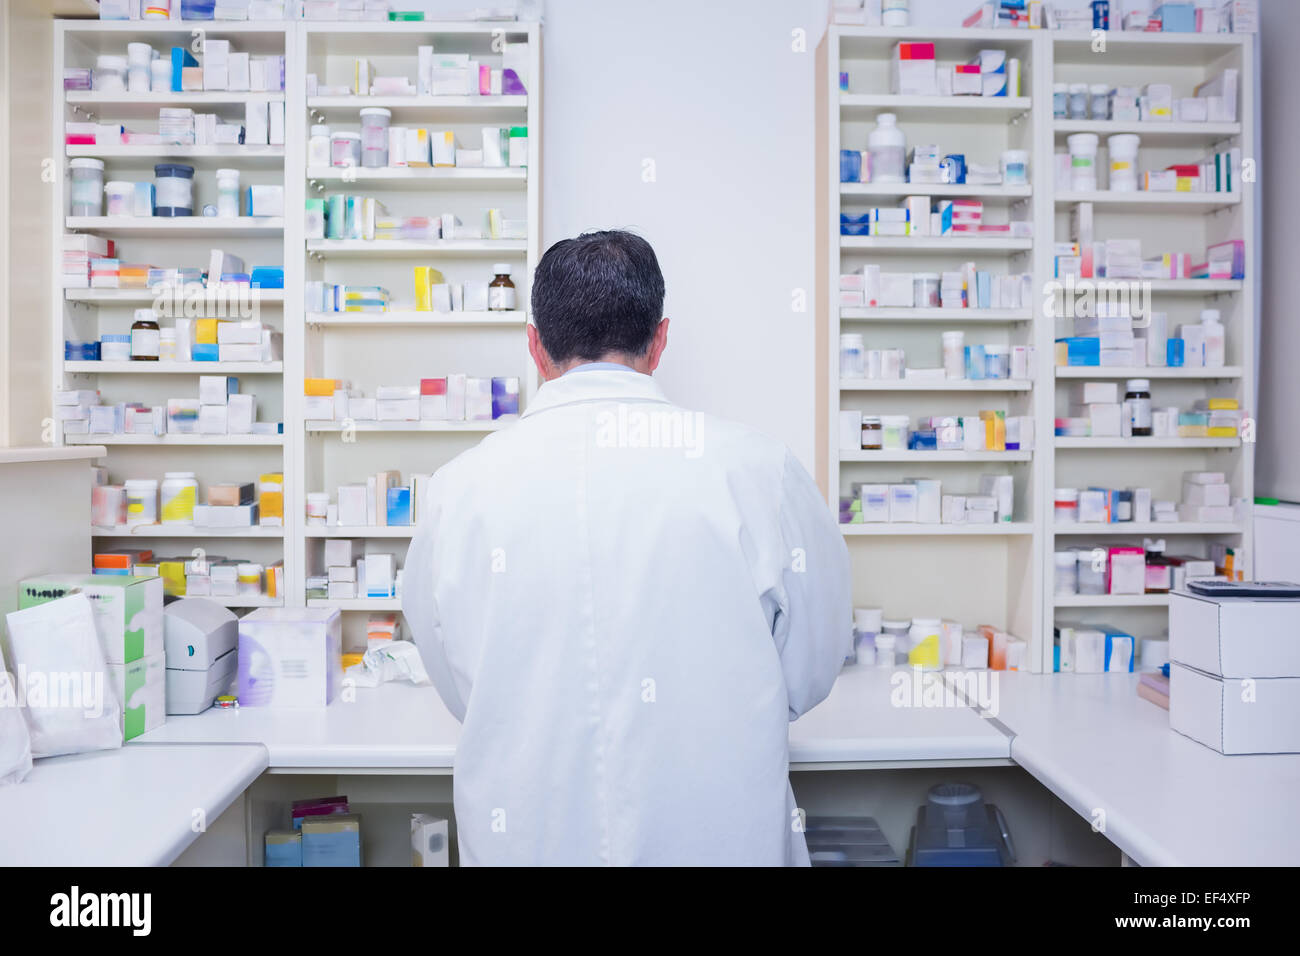 Rear view of a pharmacist working in lab coats Stock Photo